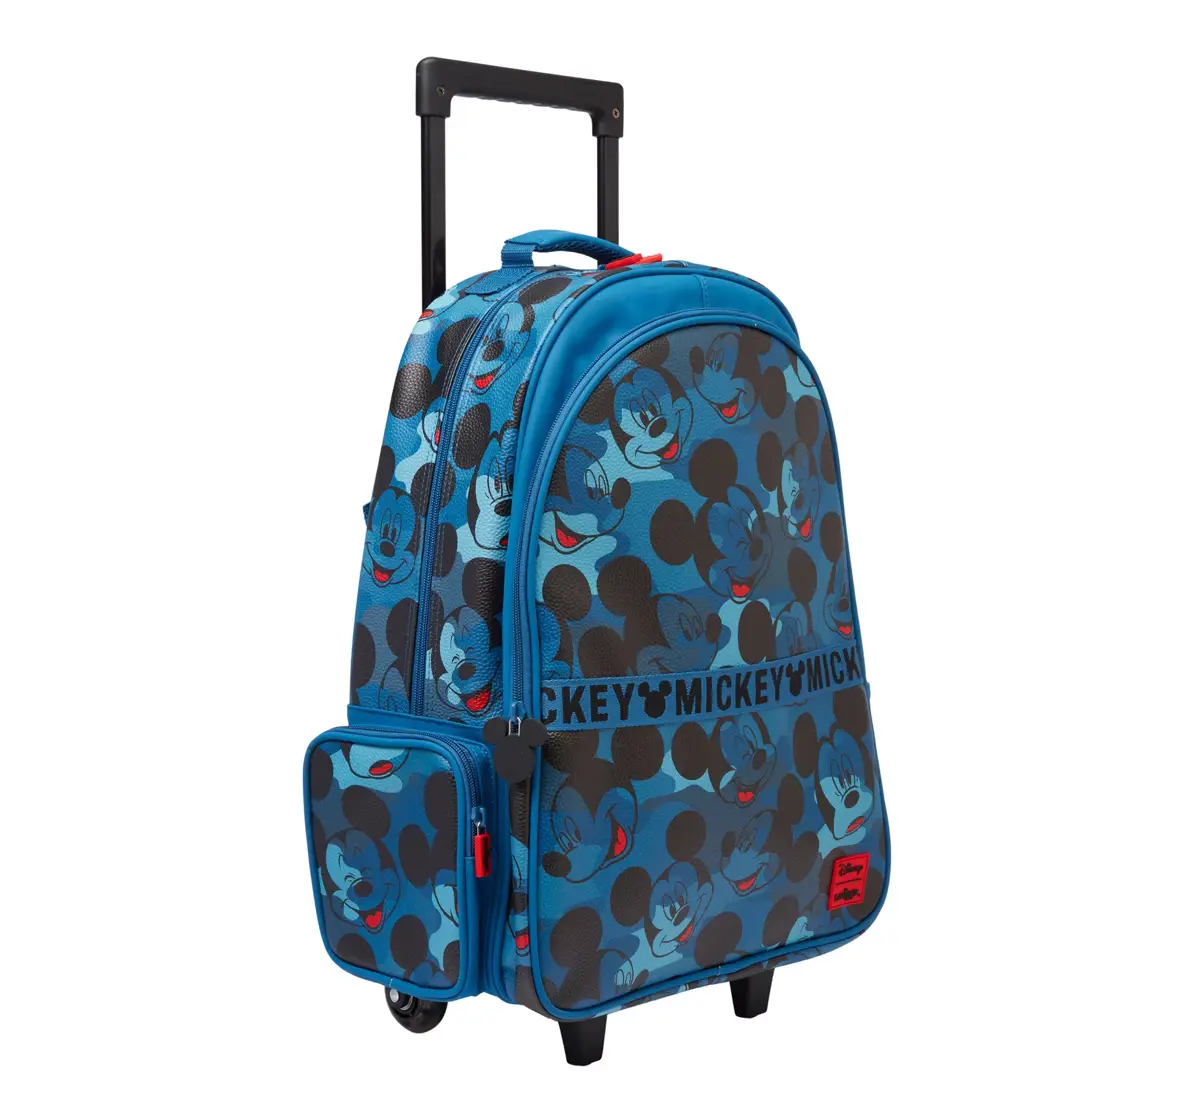 Smiggle Mickey Mouse Trolley Bag With Light Up Wheels, Blue, 3Y+